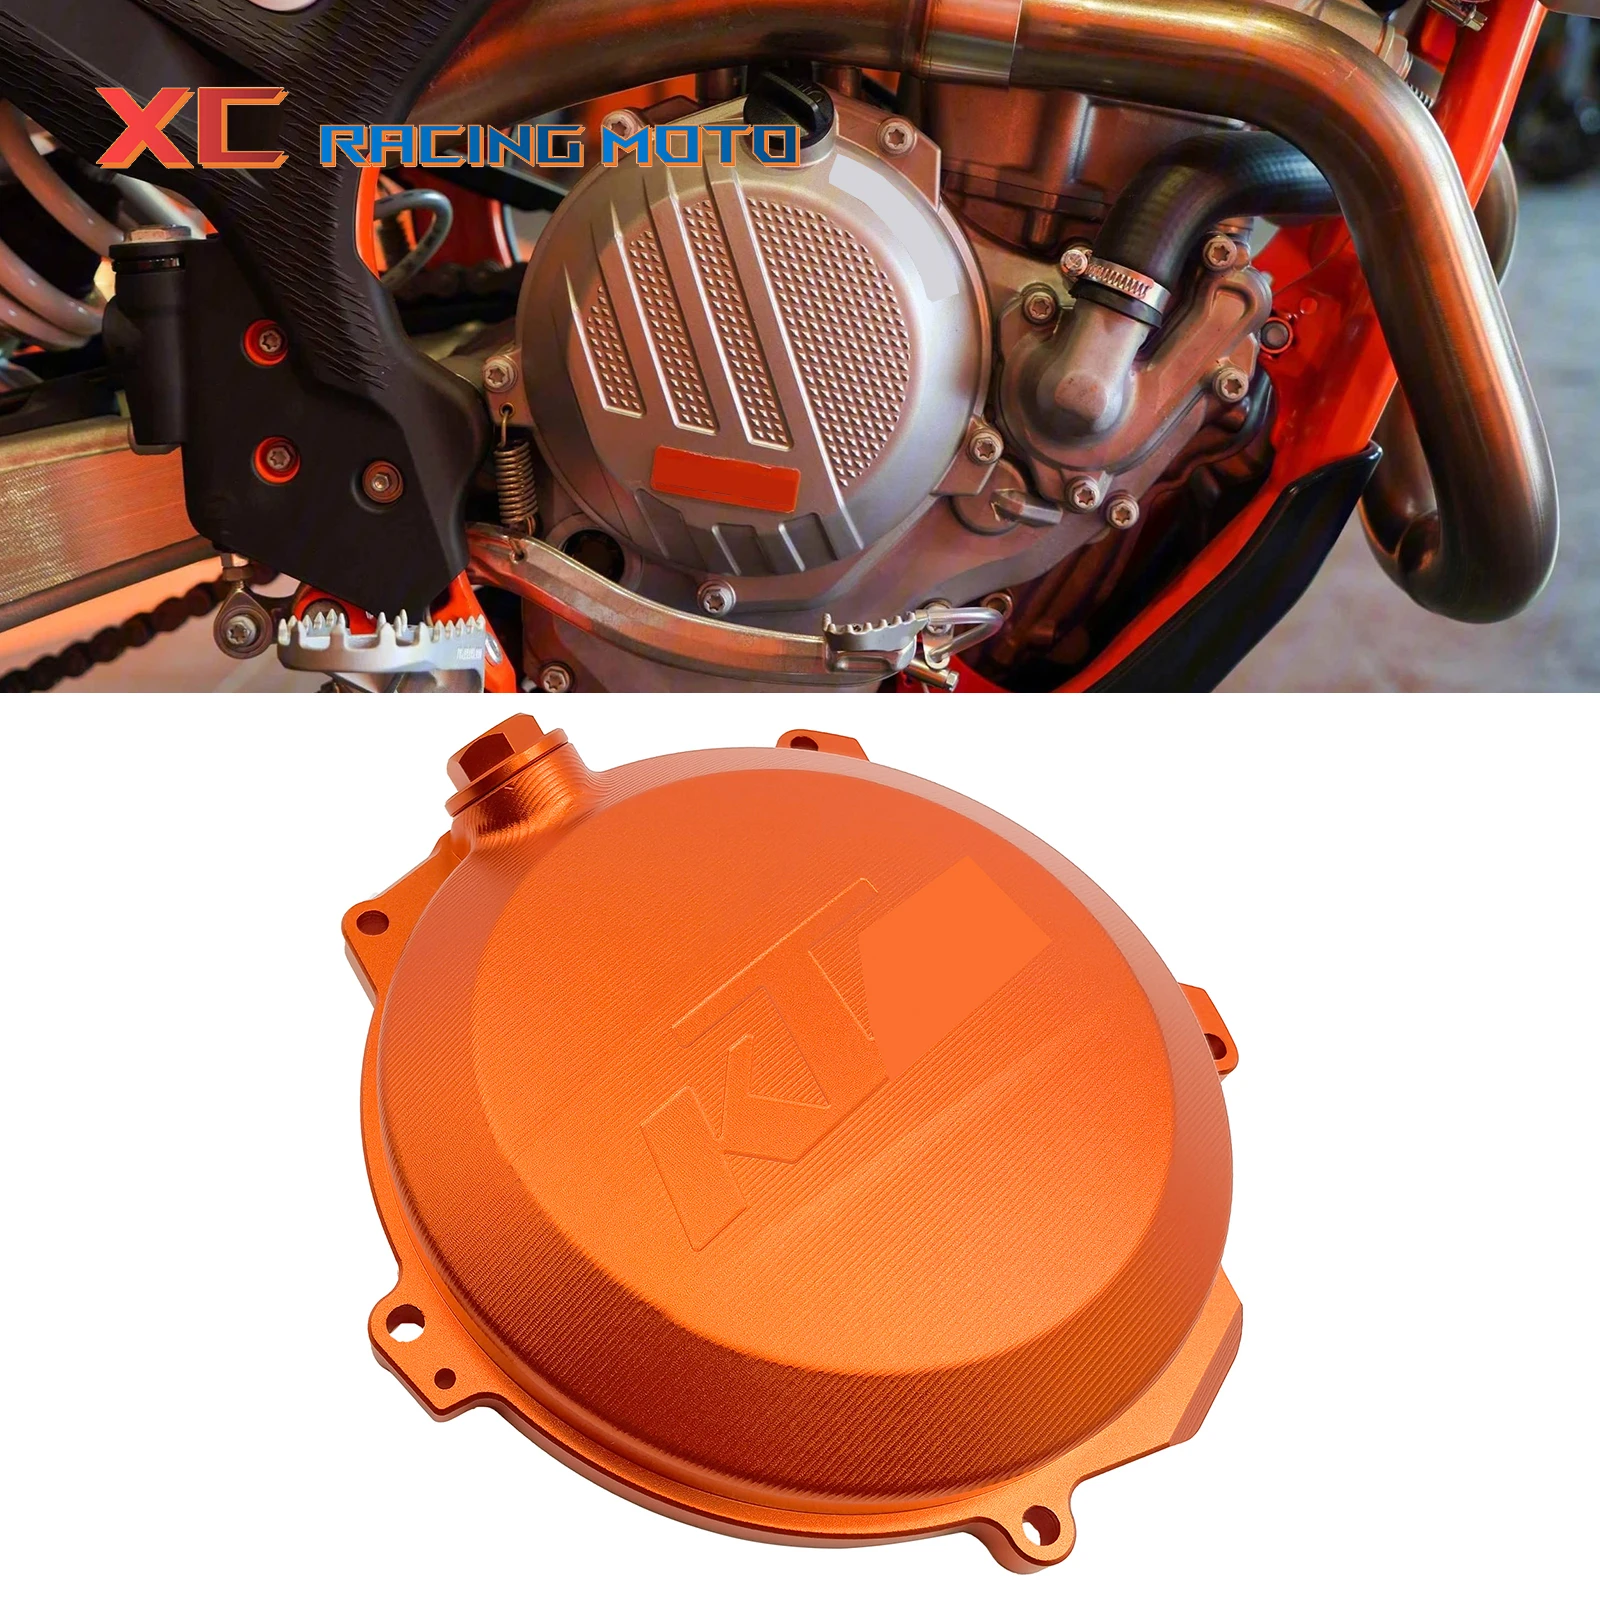 CNC Clutch Cover Guard Protector Case For KTM SXF EXCF XCF XCW FREERIDE Husaberg FE Husqvarna FC FE 250 350 350S Dirt Bike